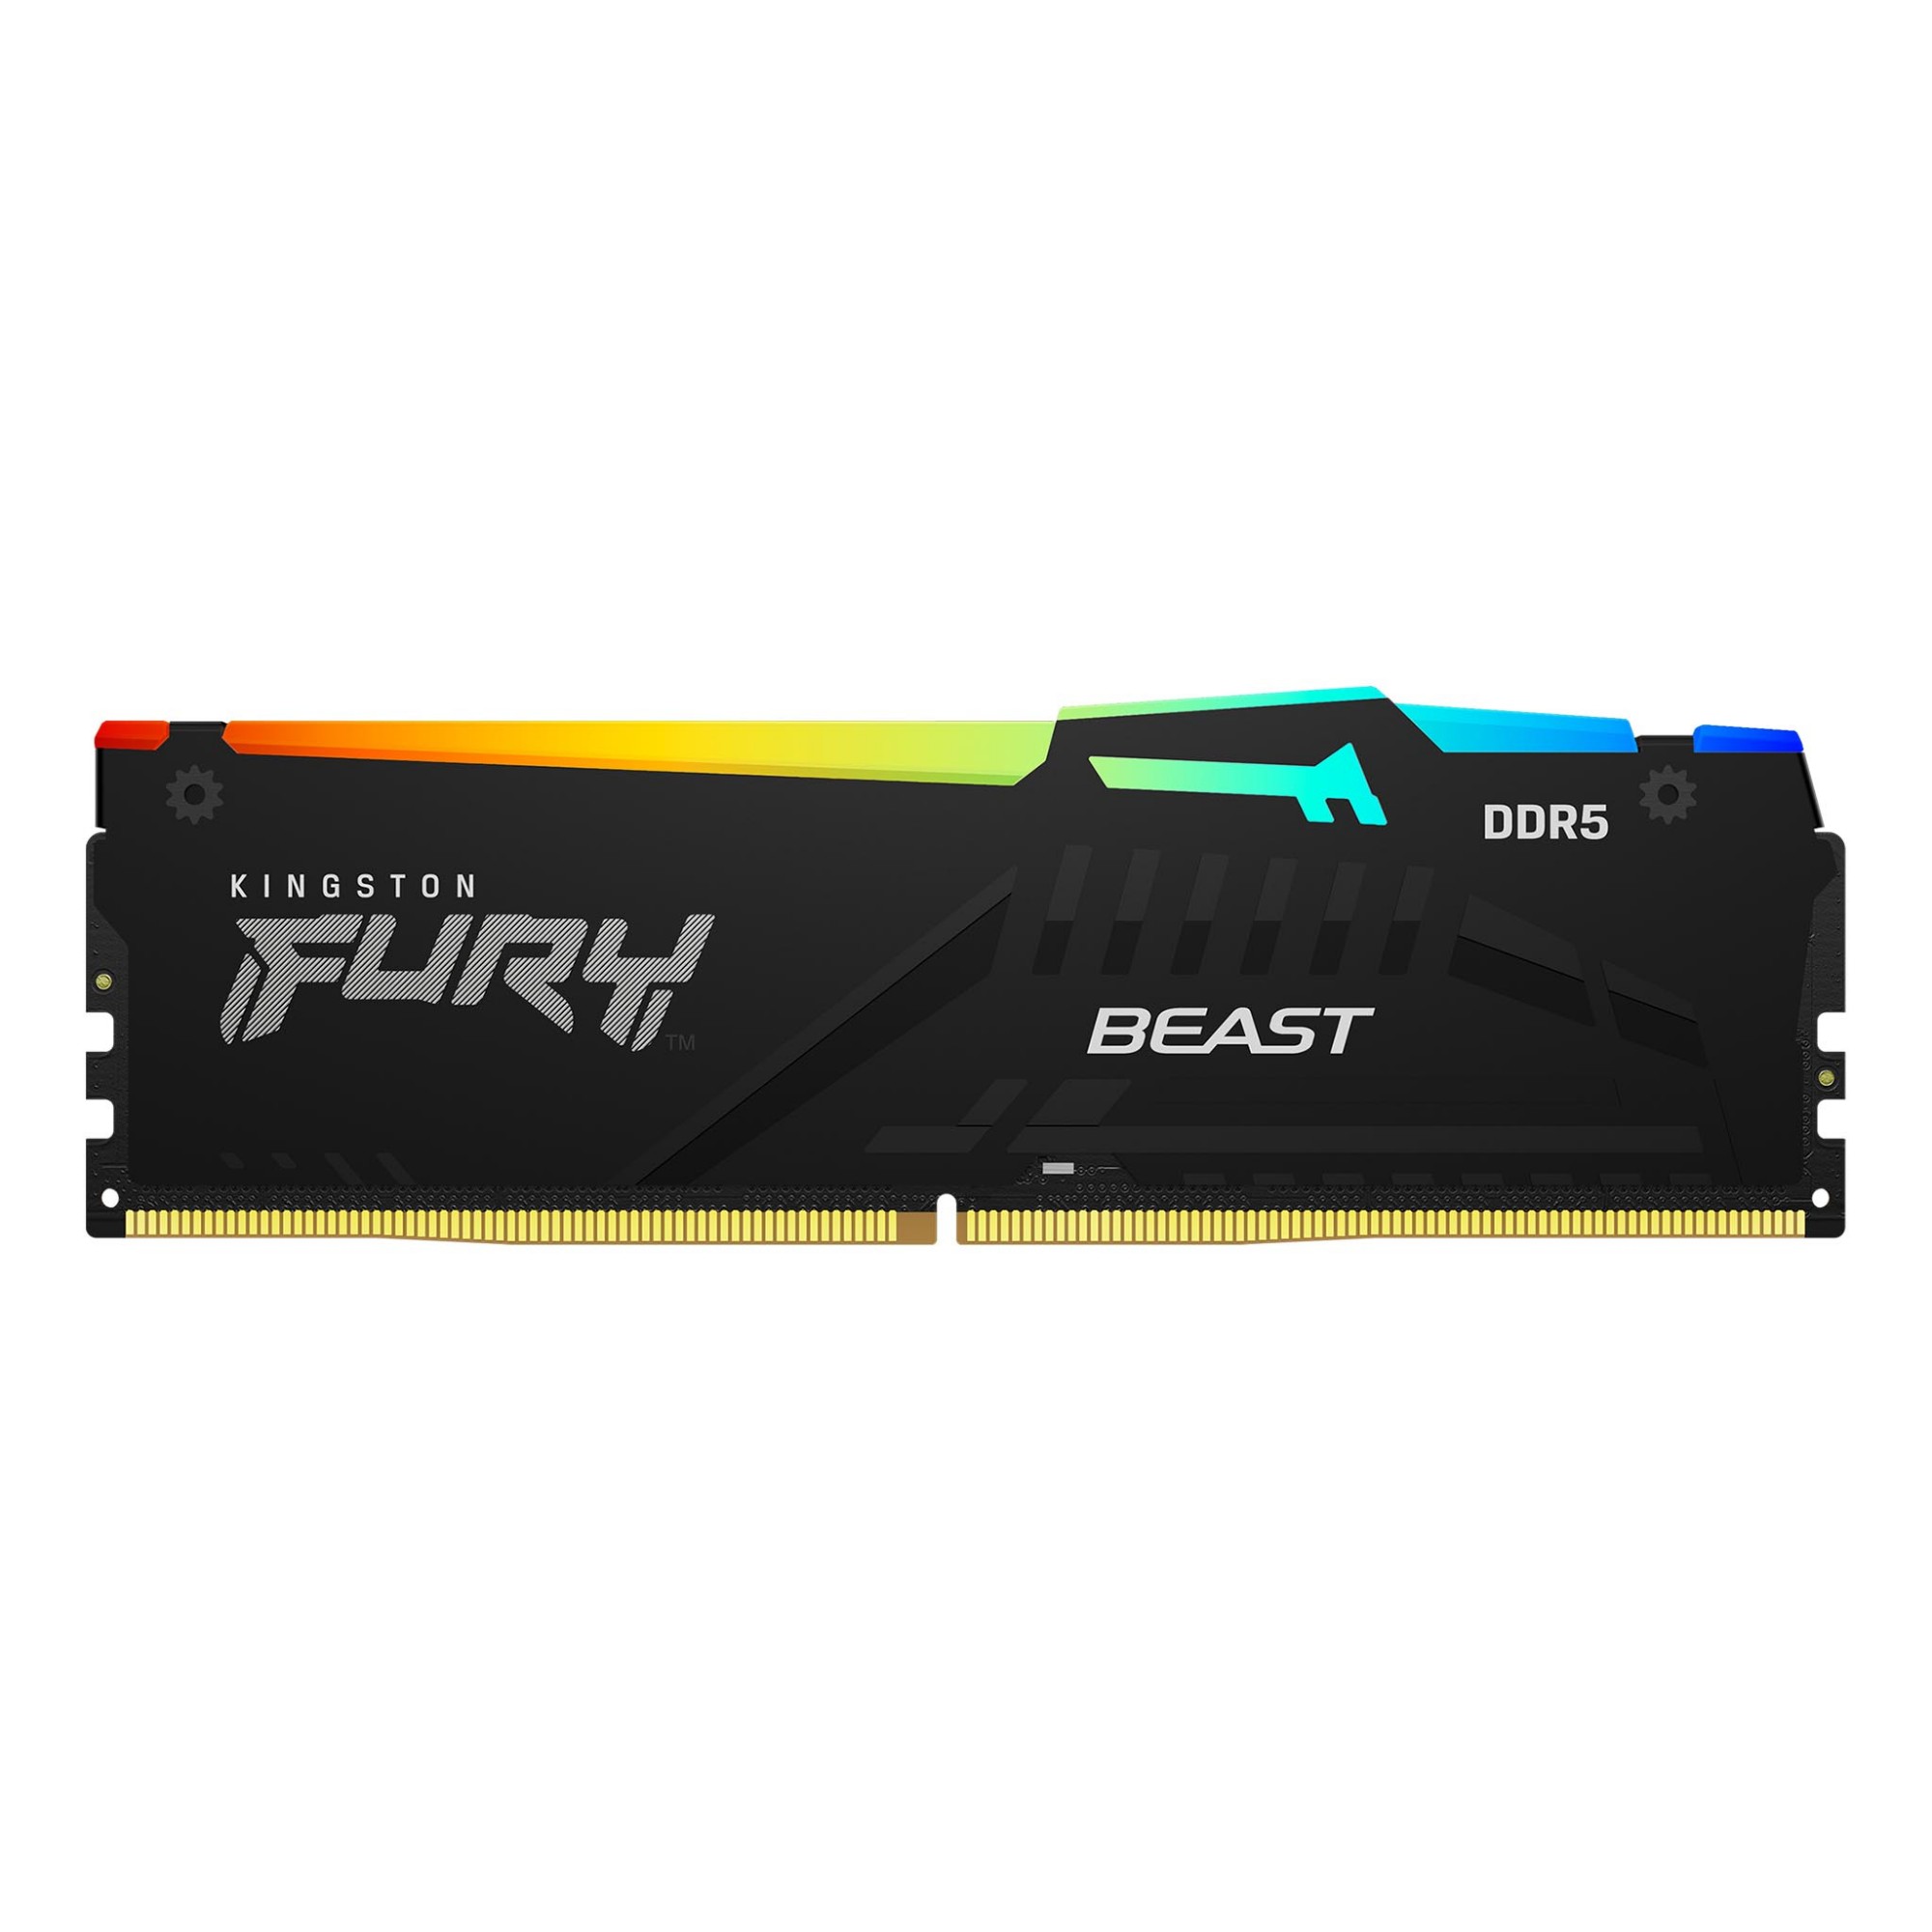 Kingston Technology FURY Beast RGB memory 128 GB 4 x 32 GB DDR5 5600 MHz, 0 in distributor/wholesale stock for resellers to sell - Stock In The Channel